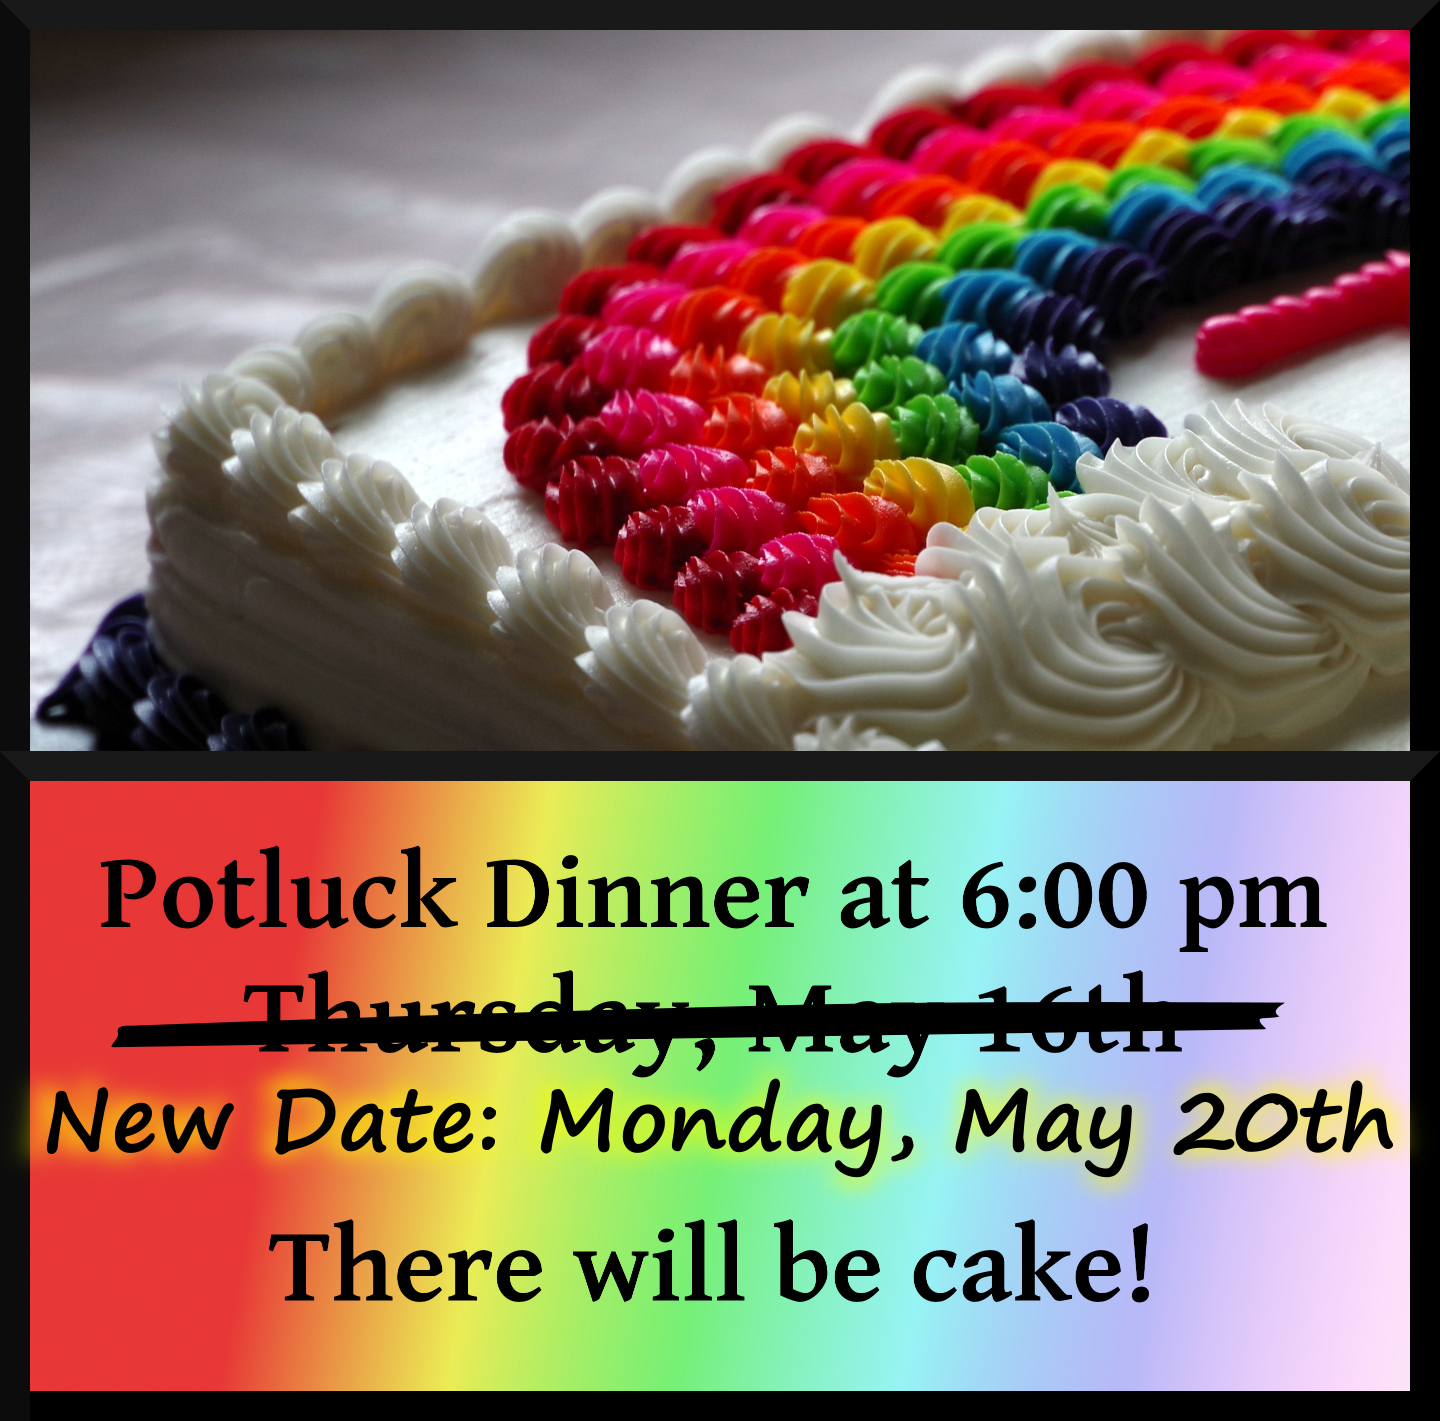 potluck to discuss and celebrate recent changes